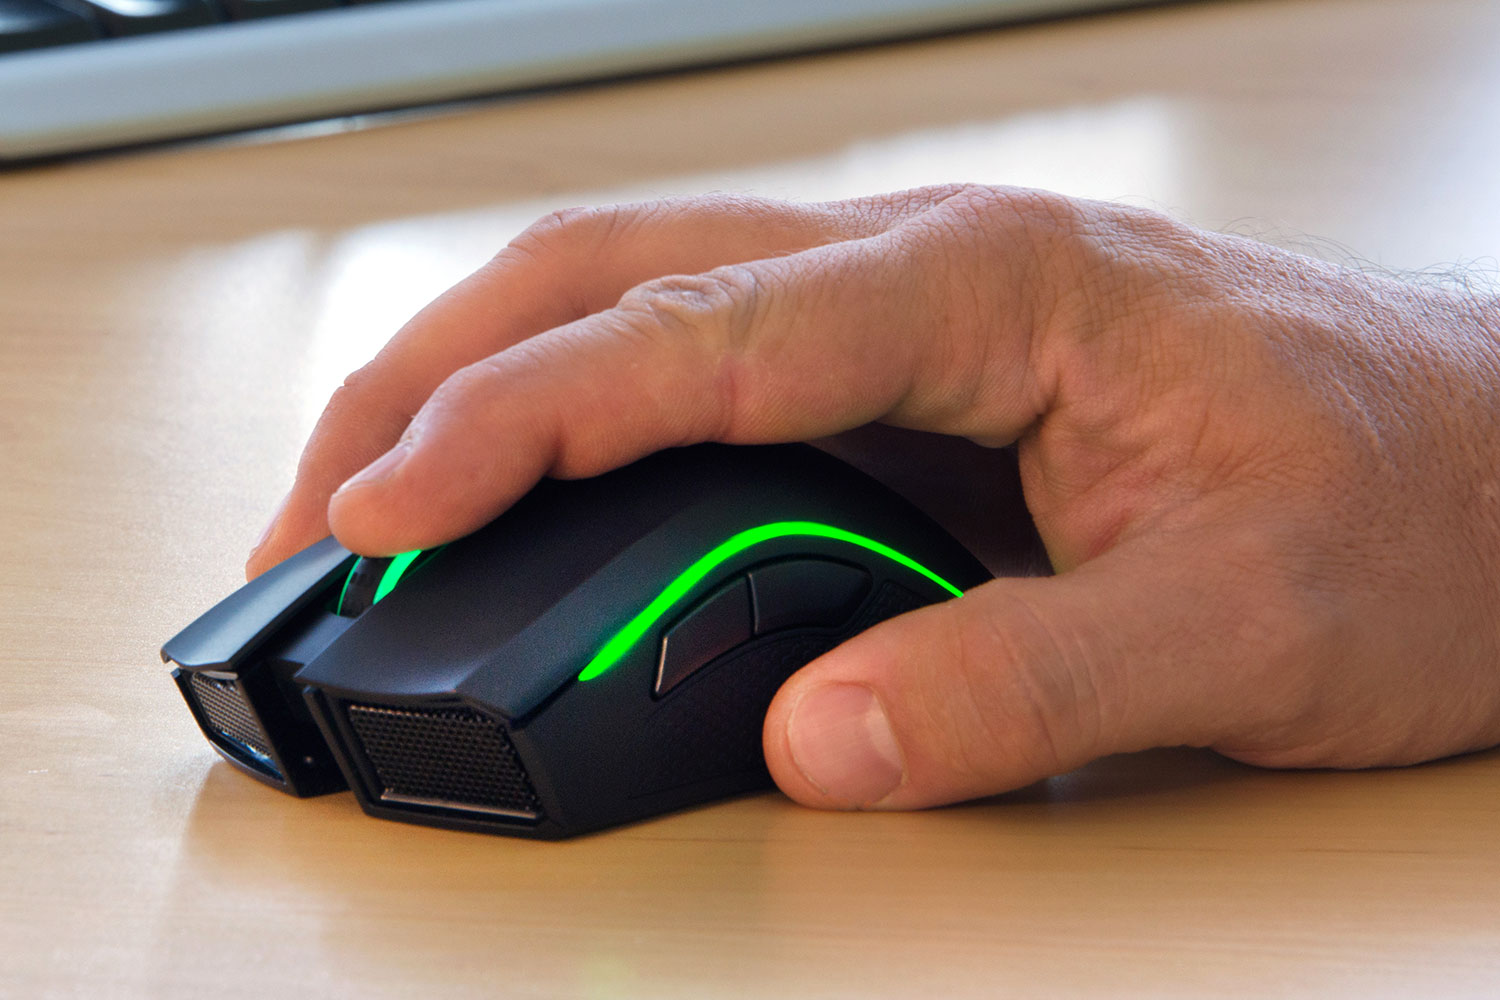 Razer Mamba Review: A Top Contender With A High Price | Digital Trends